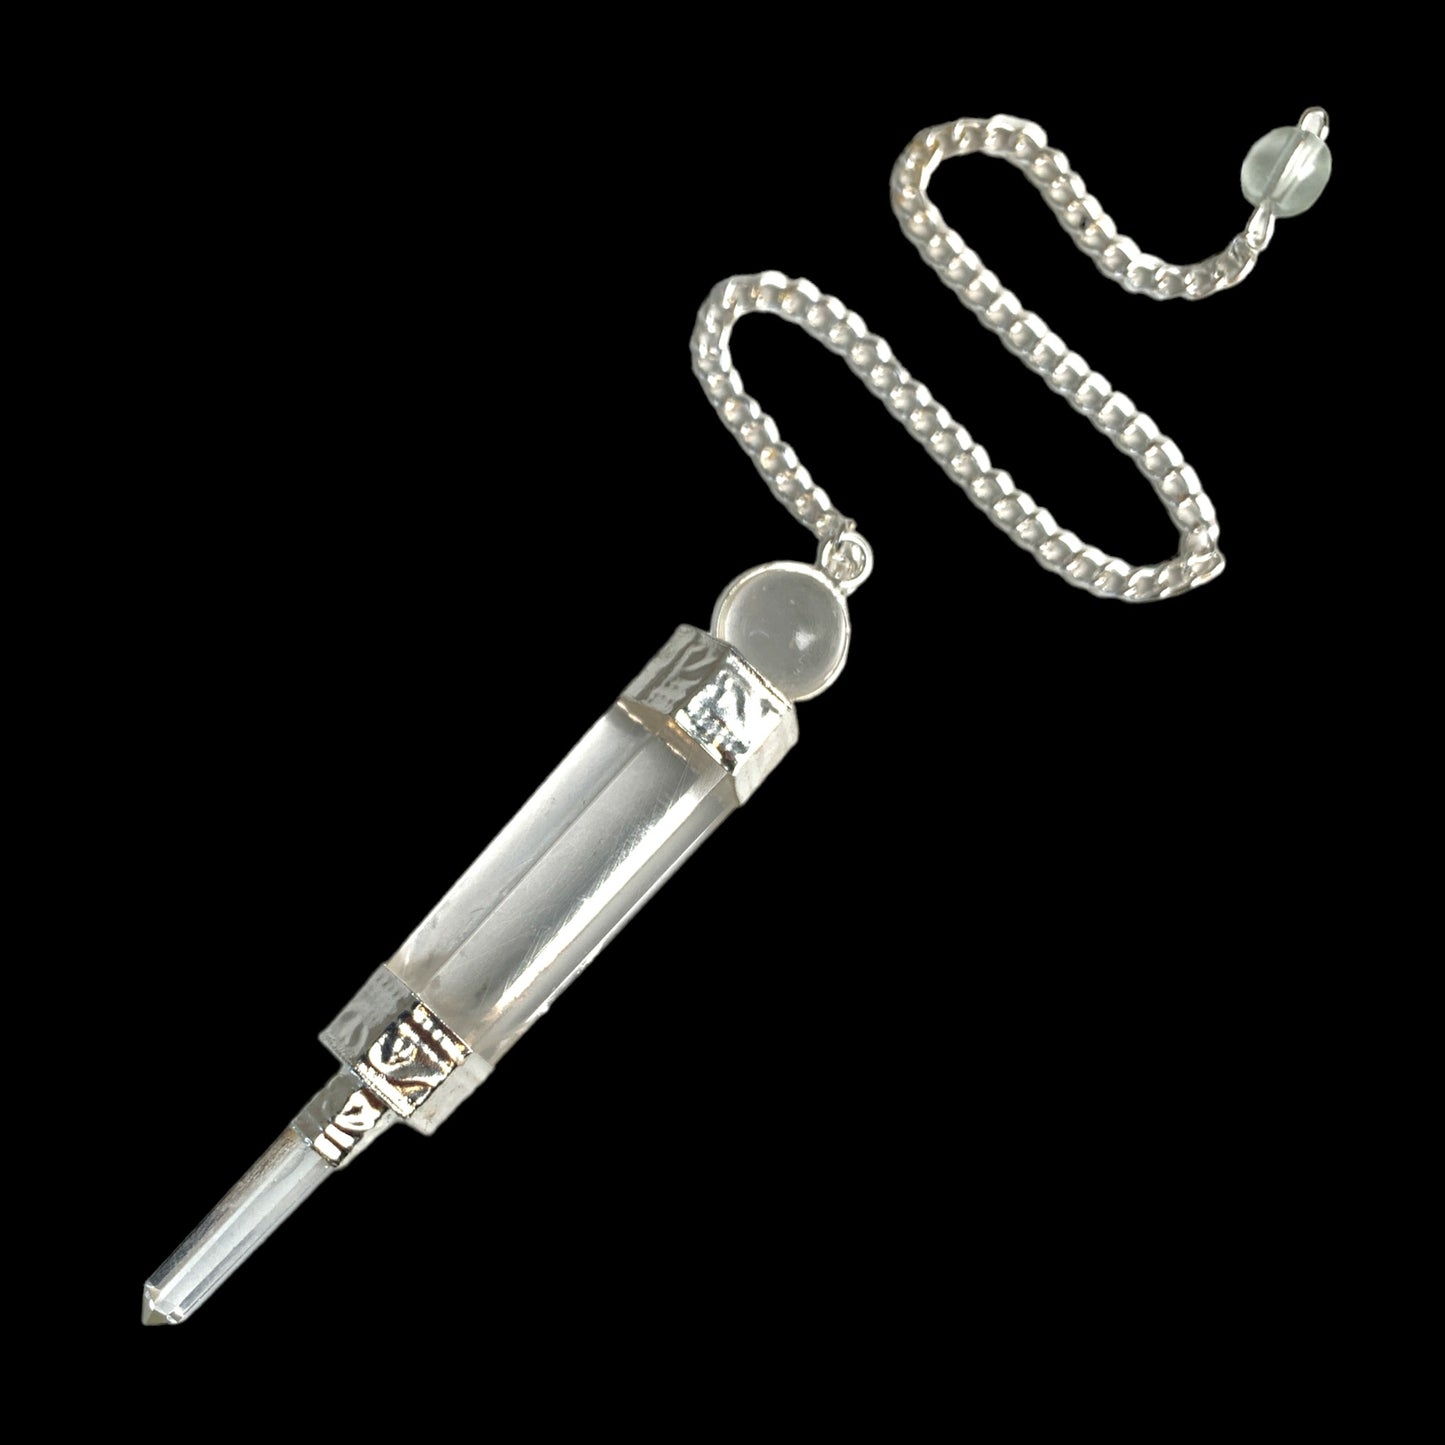 Clear Quartz 3pc Small Wand Pendulum with Chain - 40-50mm - 25g - NEW422